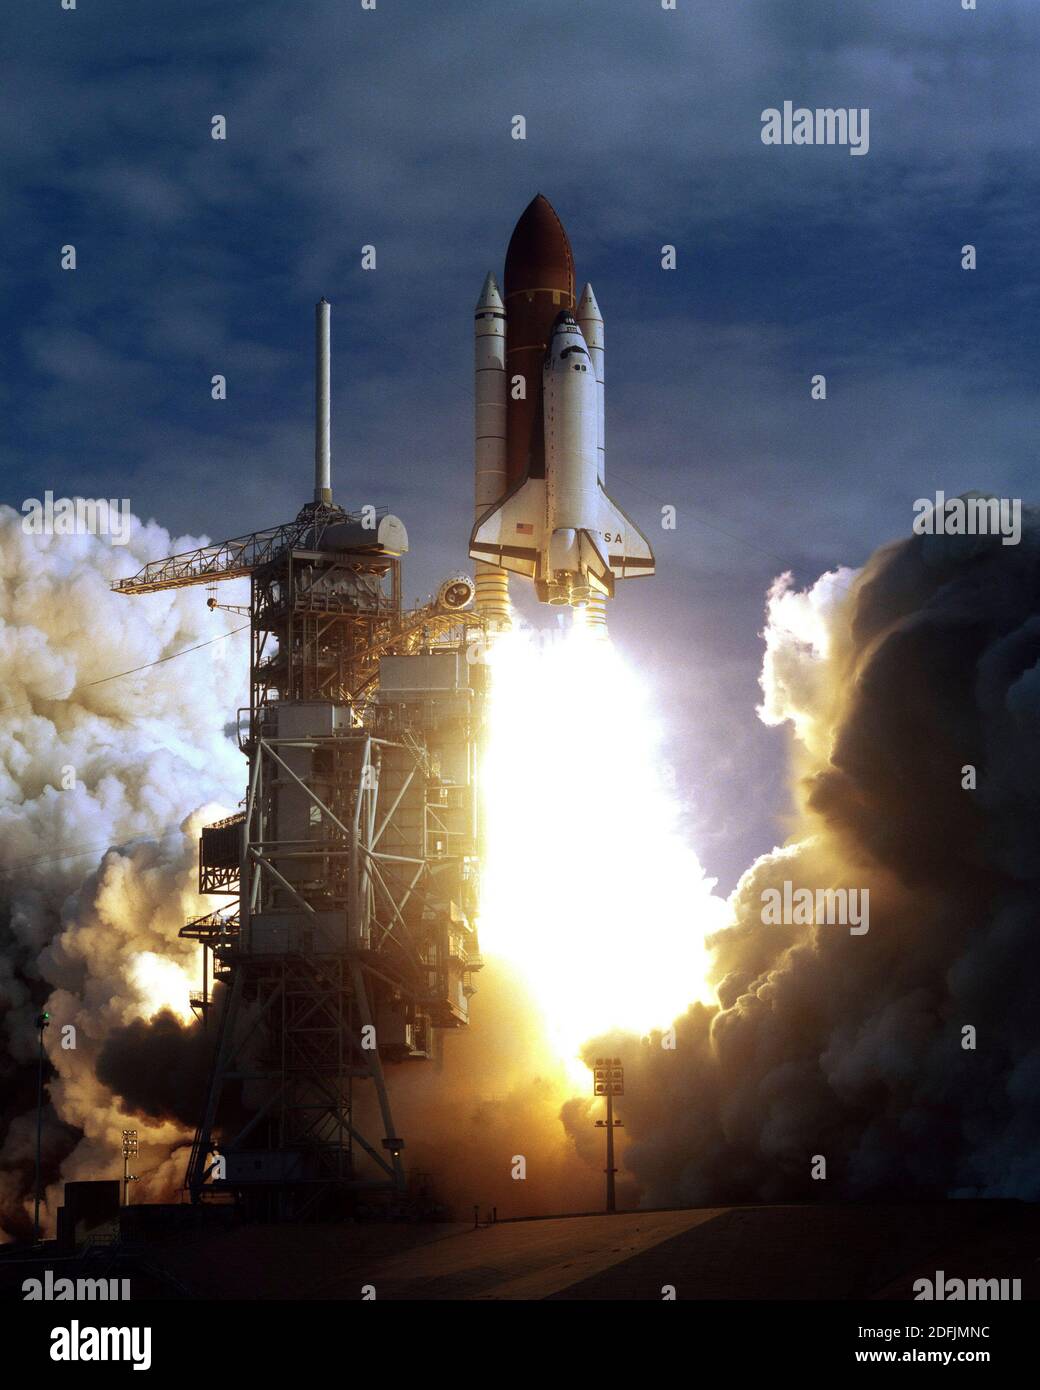 KENNEDY SPACE CENTER, USA - 20 October 1995 - The Space Shuttle Columbia lifts off from Launch Pad 39B, at the Kennedy Space Center (KSC), to begin a Stock Photo